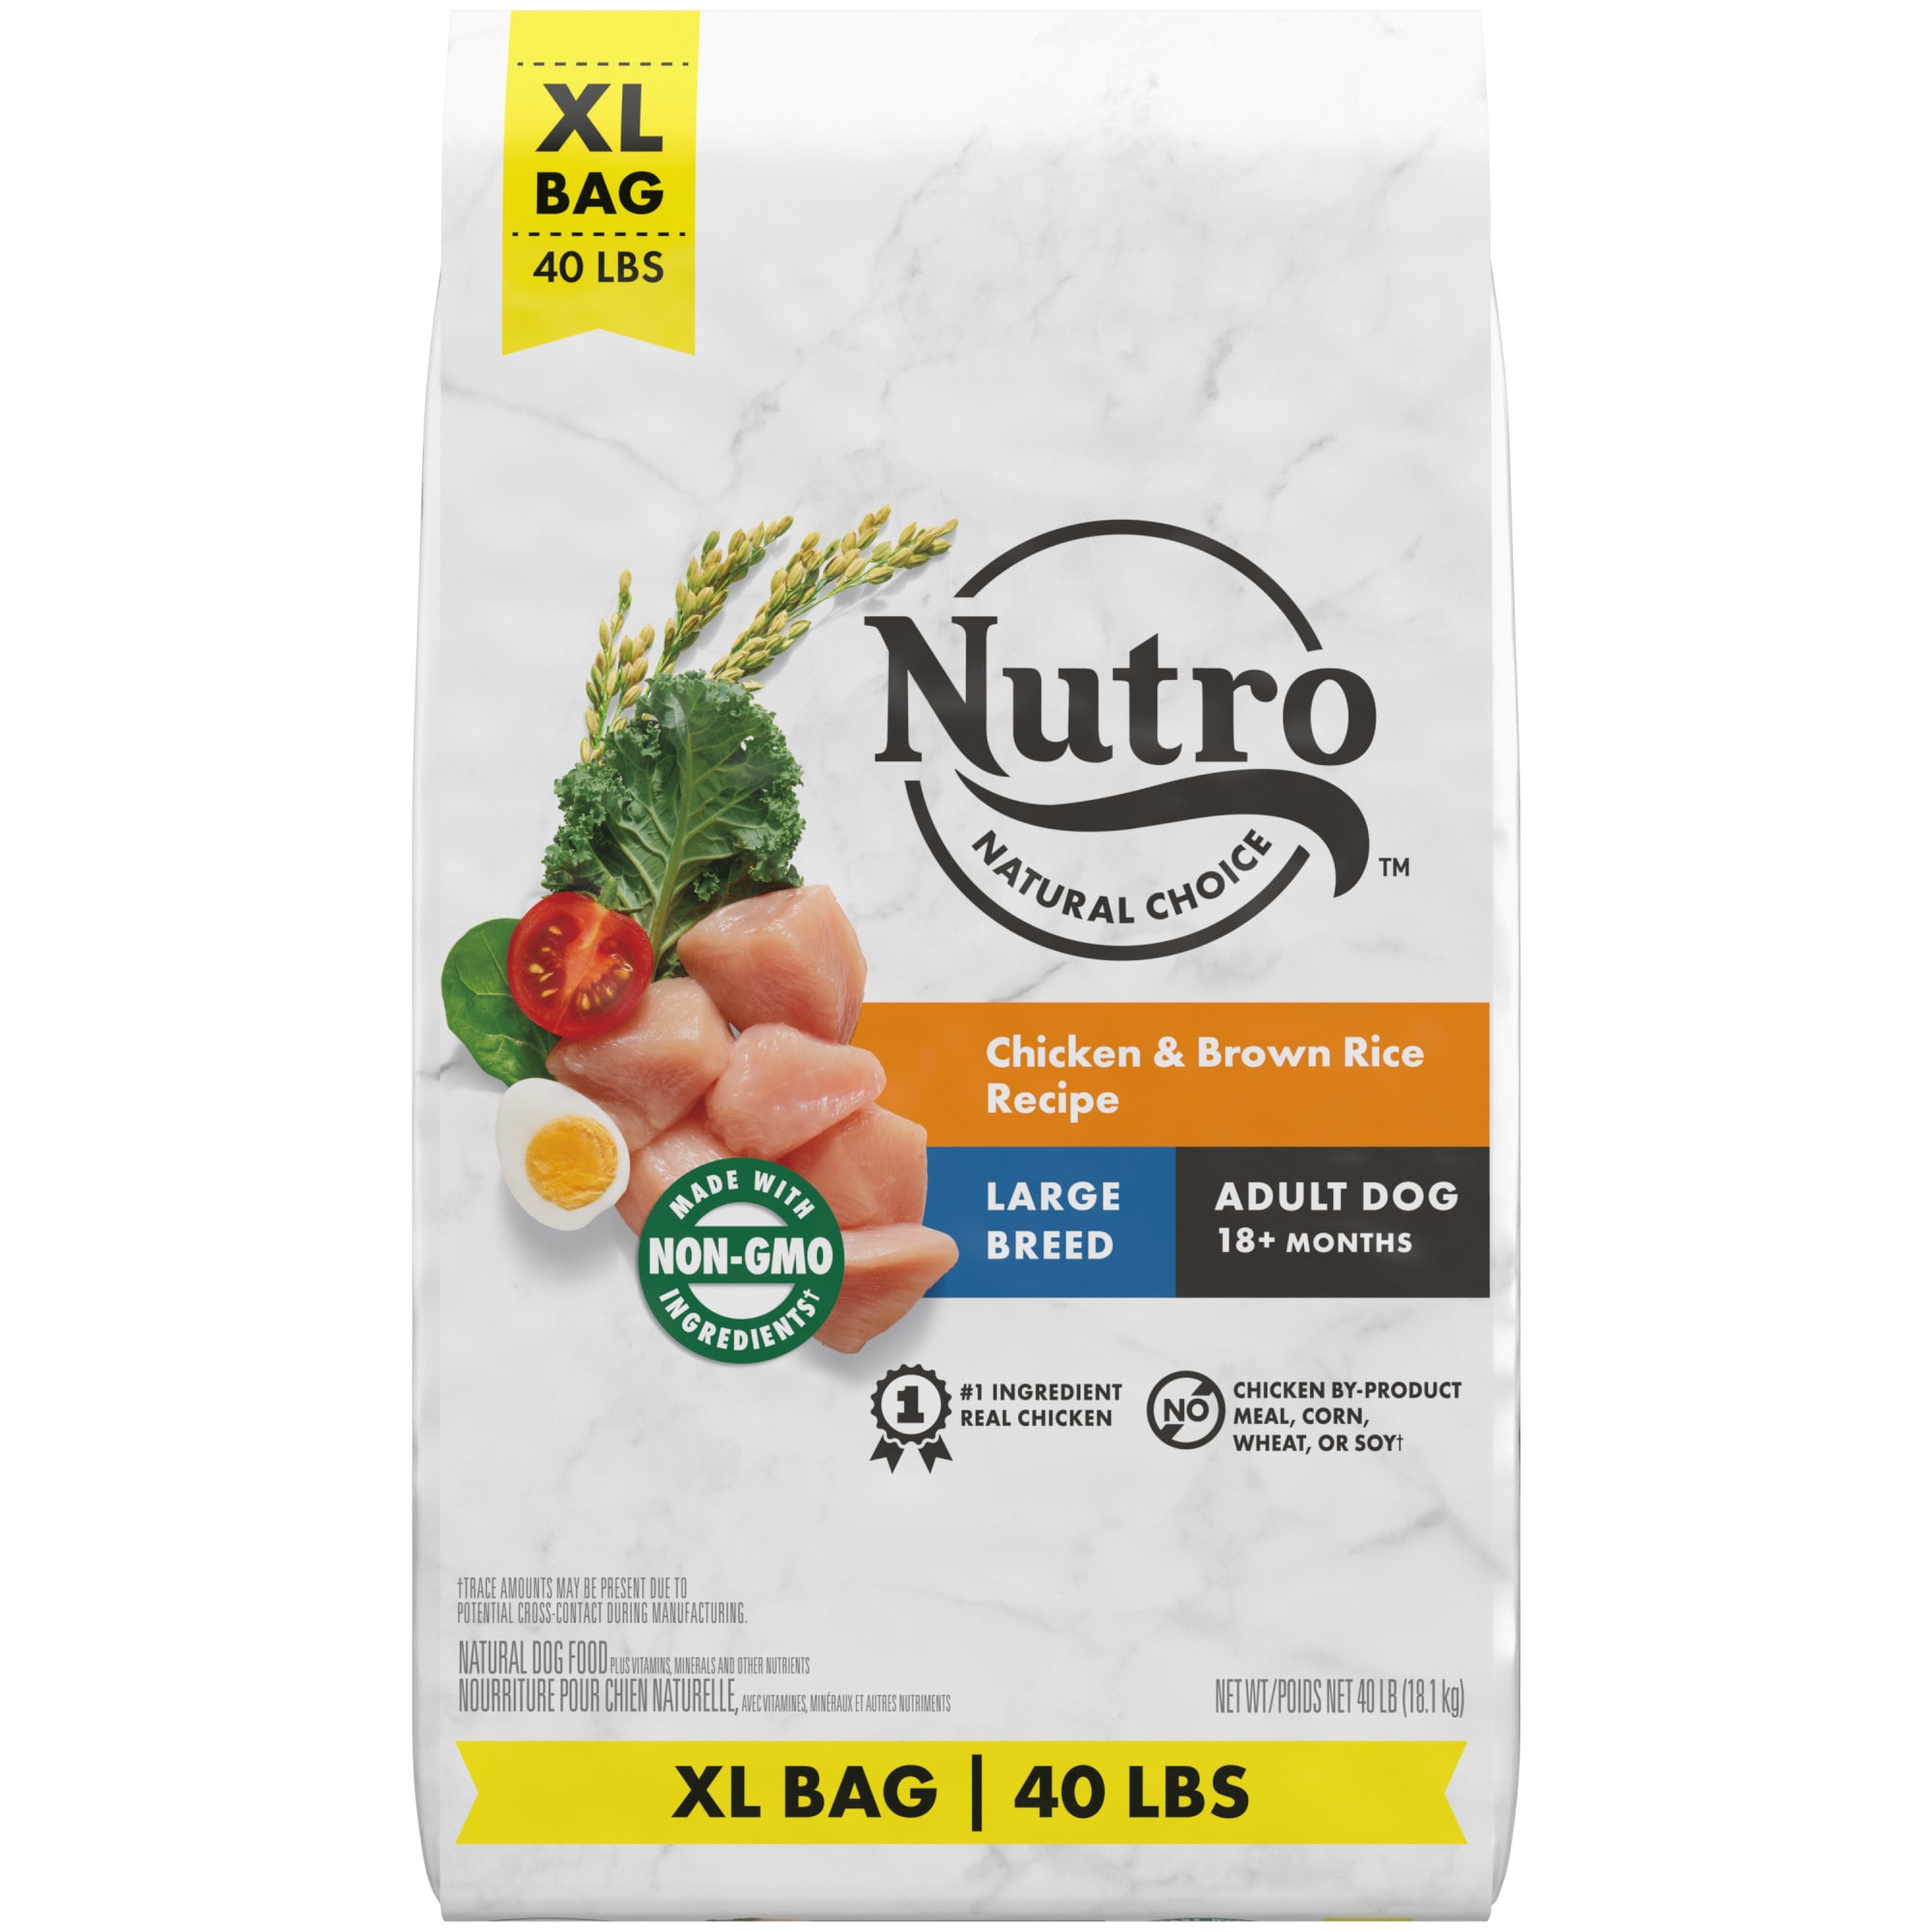 nutro large breed healthy weight